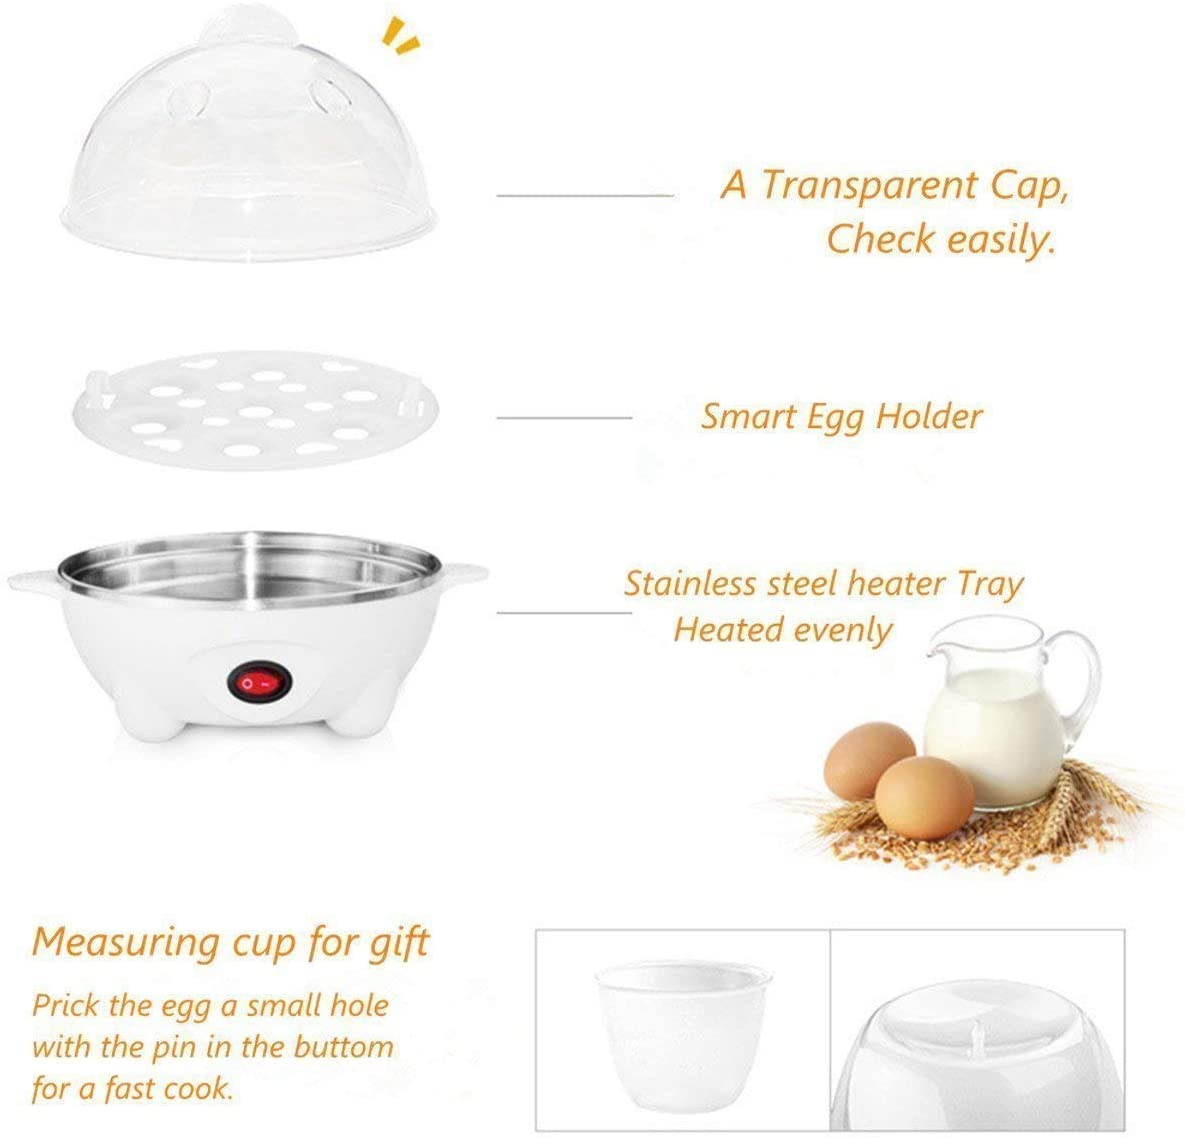 Buy Wholesale China 3-in-1 Electric Hard Boiled Egg Cooker Poacher